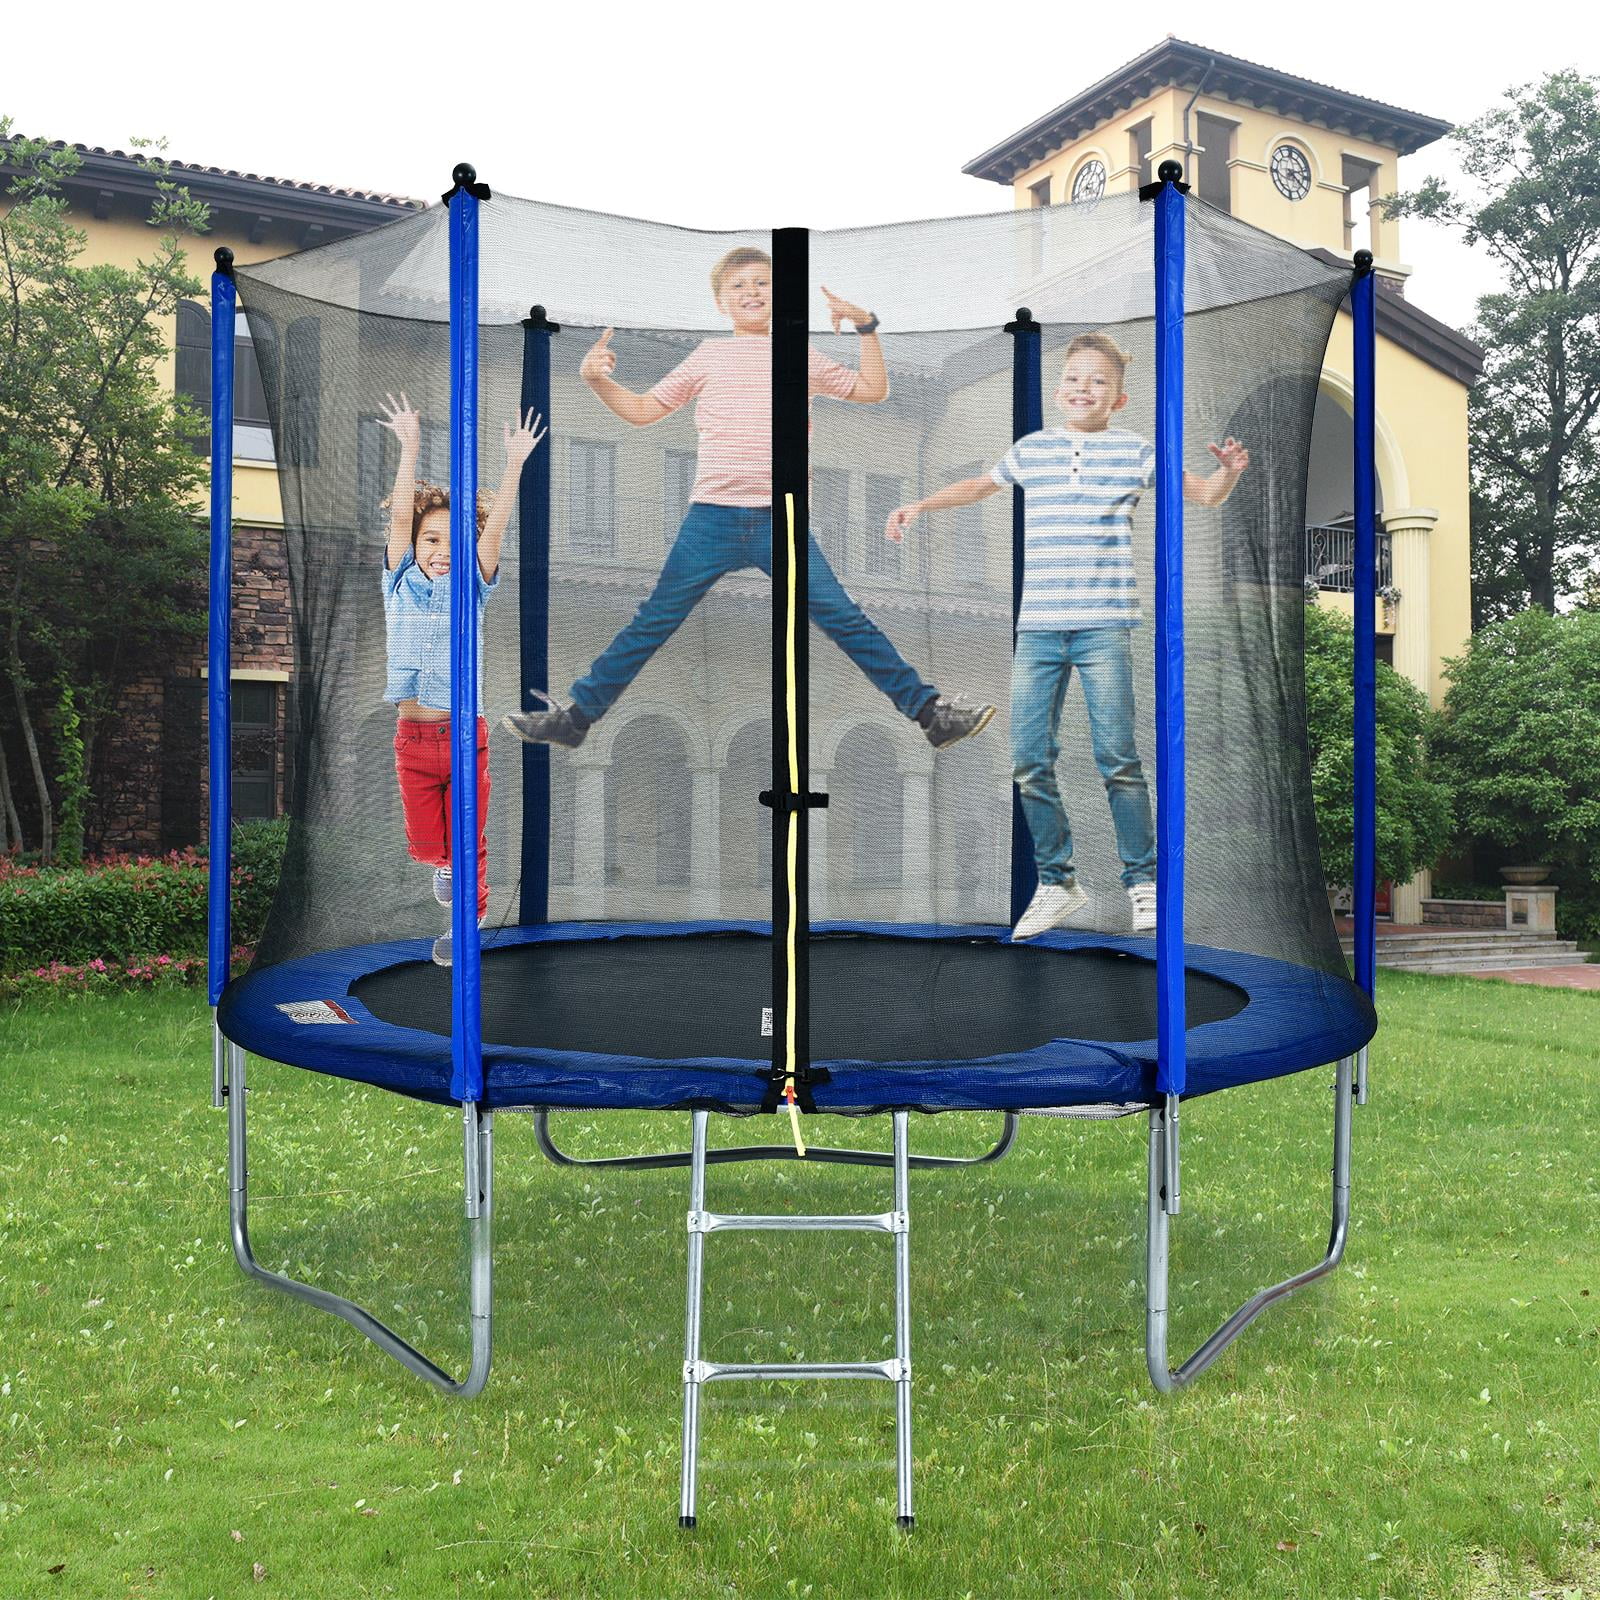 750LBS Outdoor Tranpoline with Safety Enclosure Net Easy Assembly Round Recreational Jumping Bed Lavay 12FT Tranpoline for Adults and Kids Basketball Hoop and Ladder 